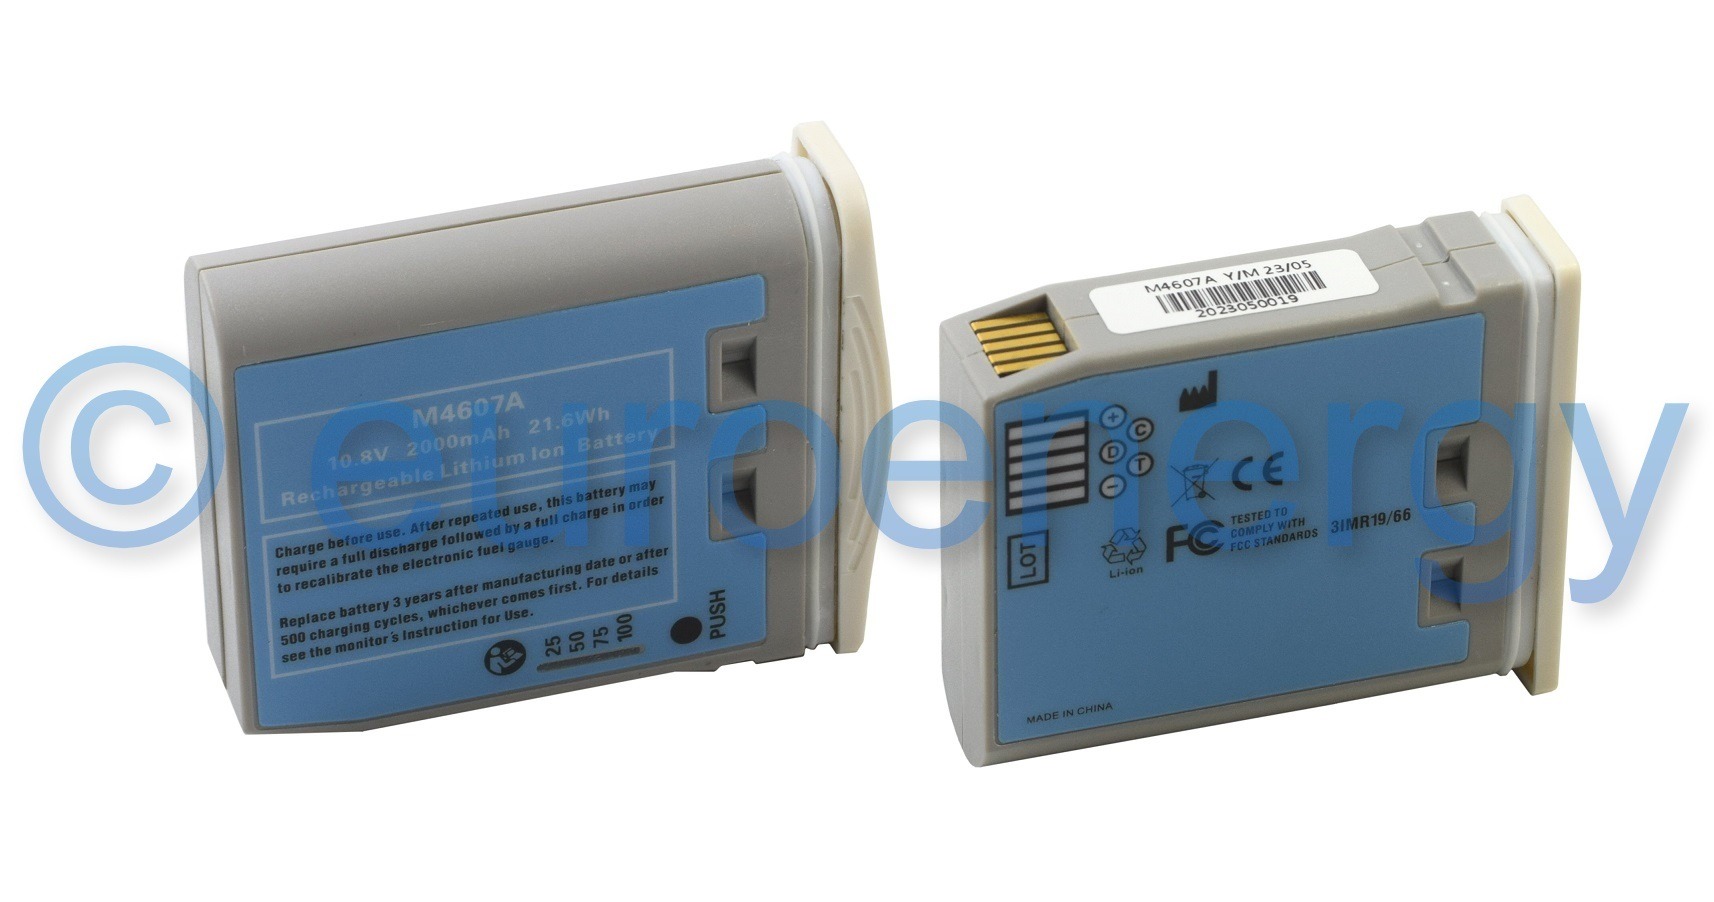 Compatible Intellivue MP2/X2 Monitor Battery 989803148701/M4607A